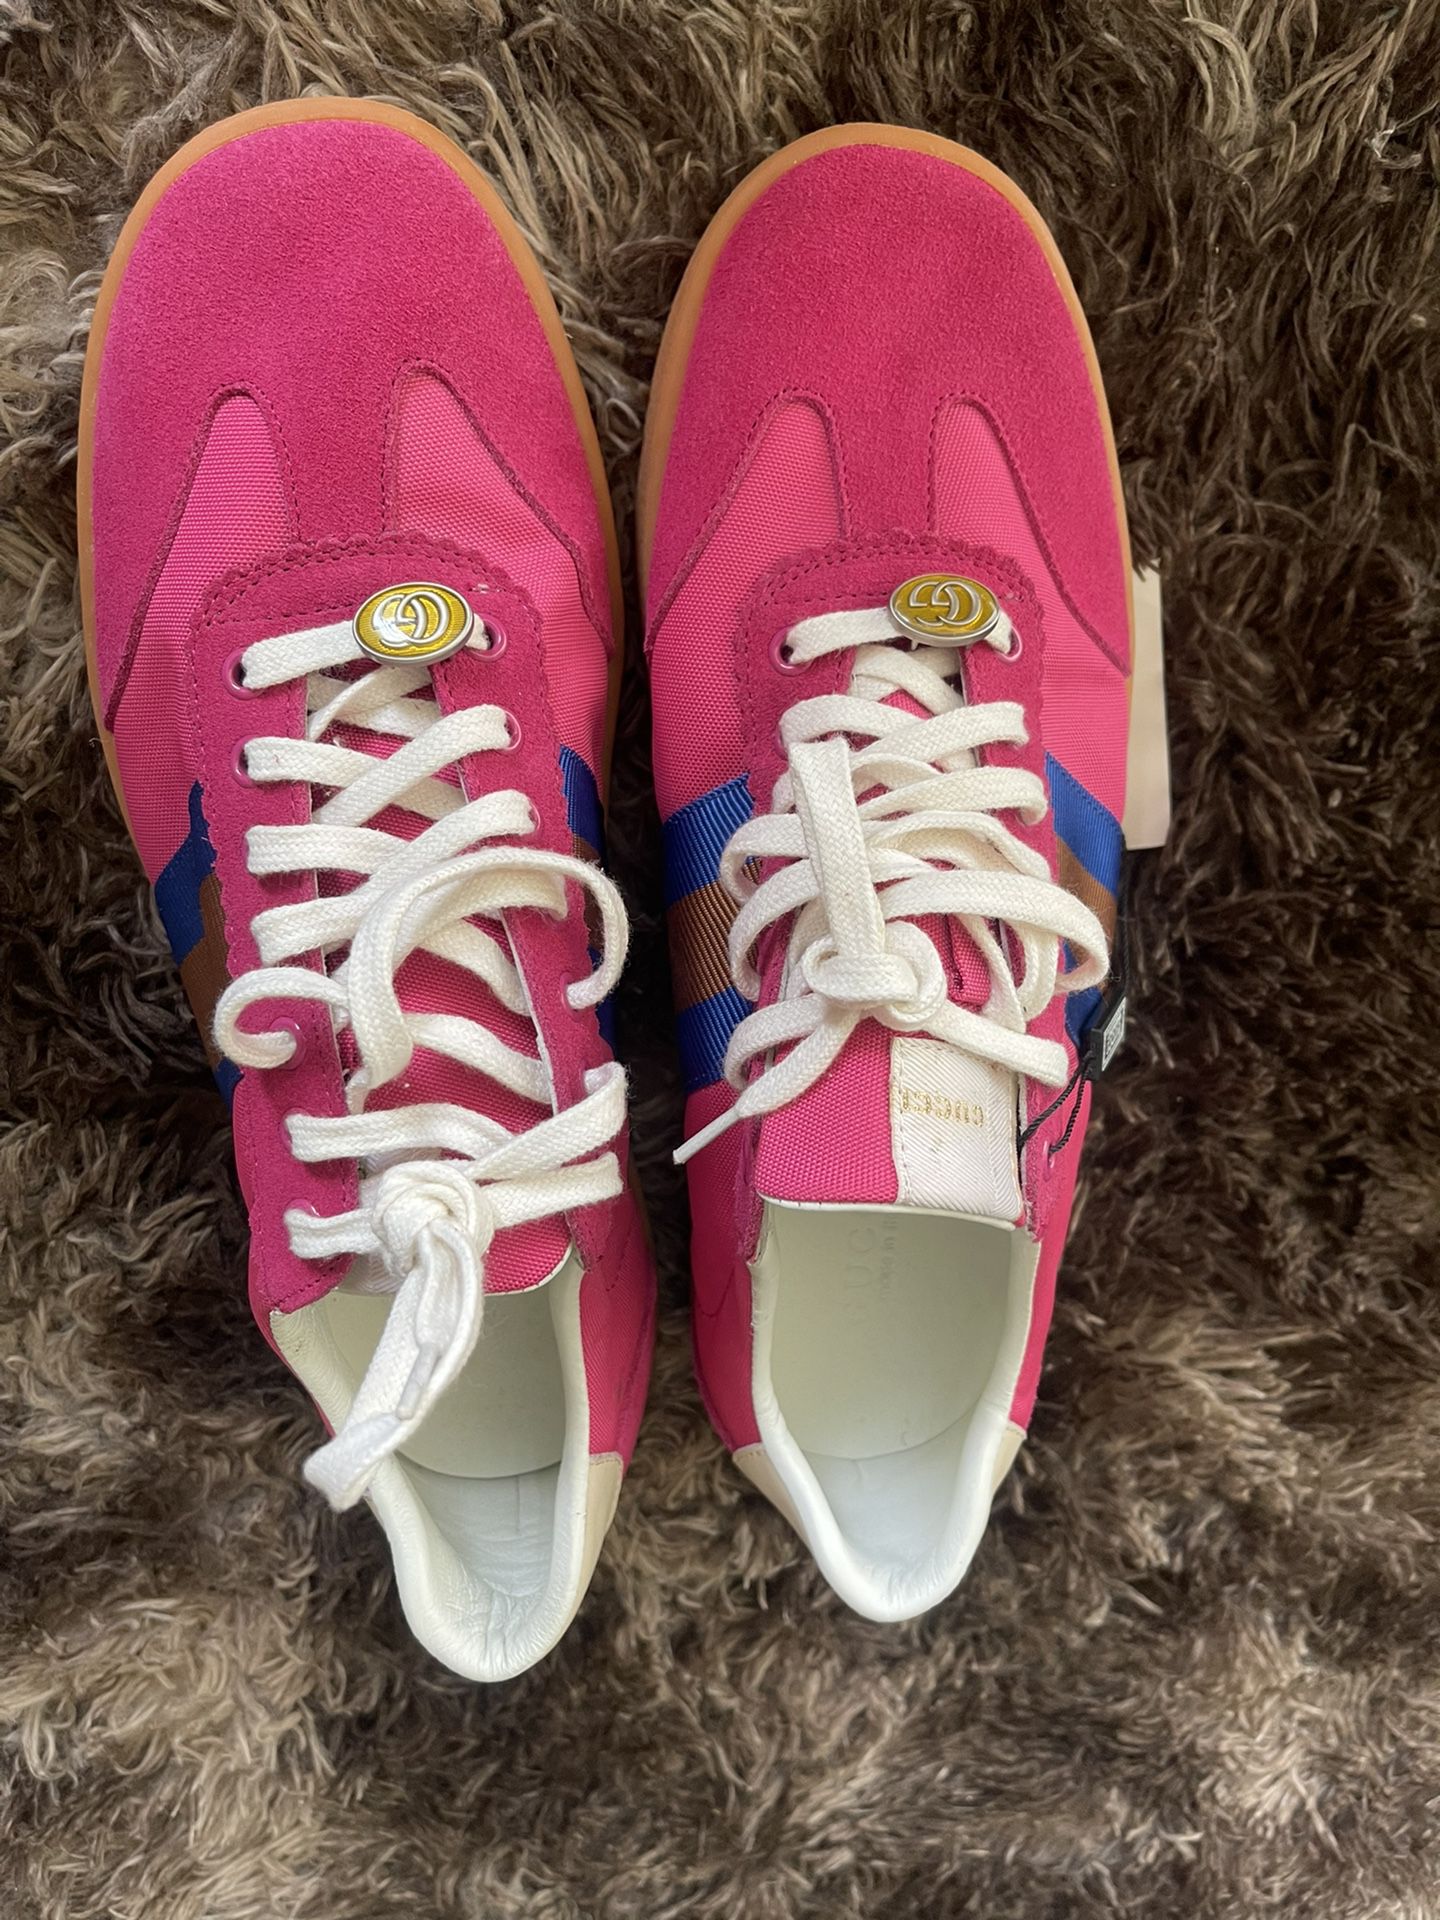 Gucci G74 TRAINERS SZ 11 “Controllato card” For Authenticity for Sale ...